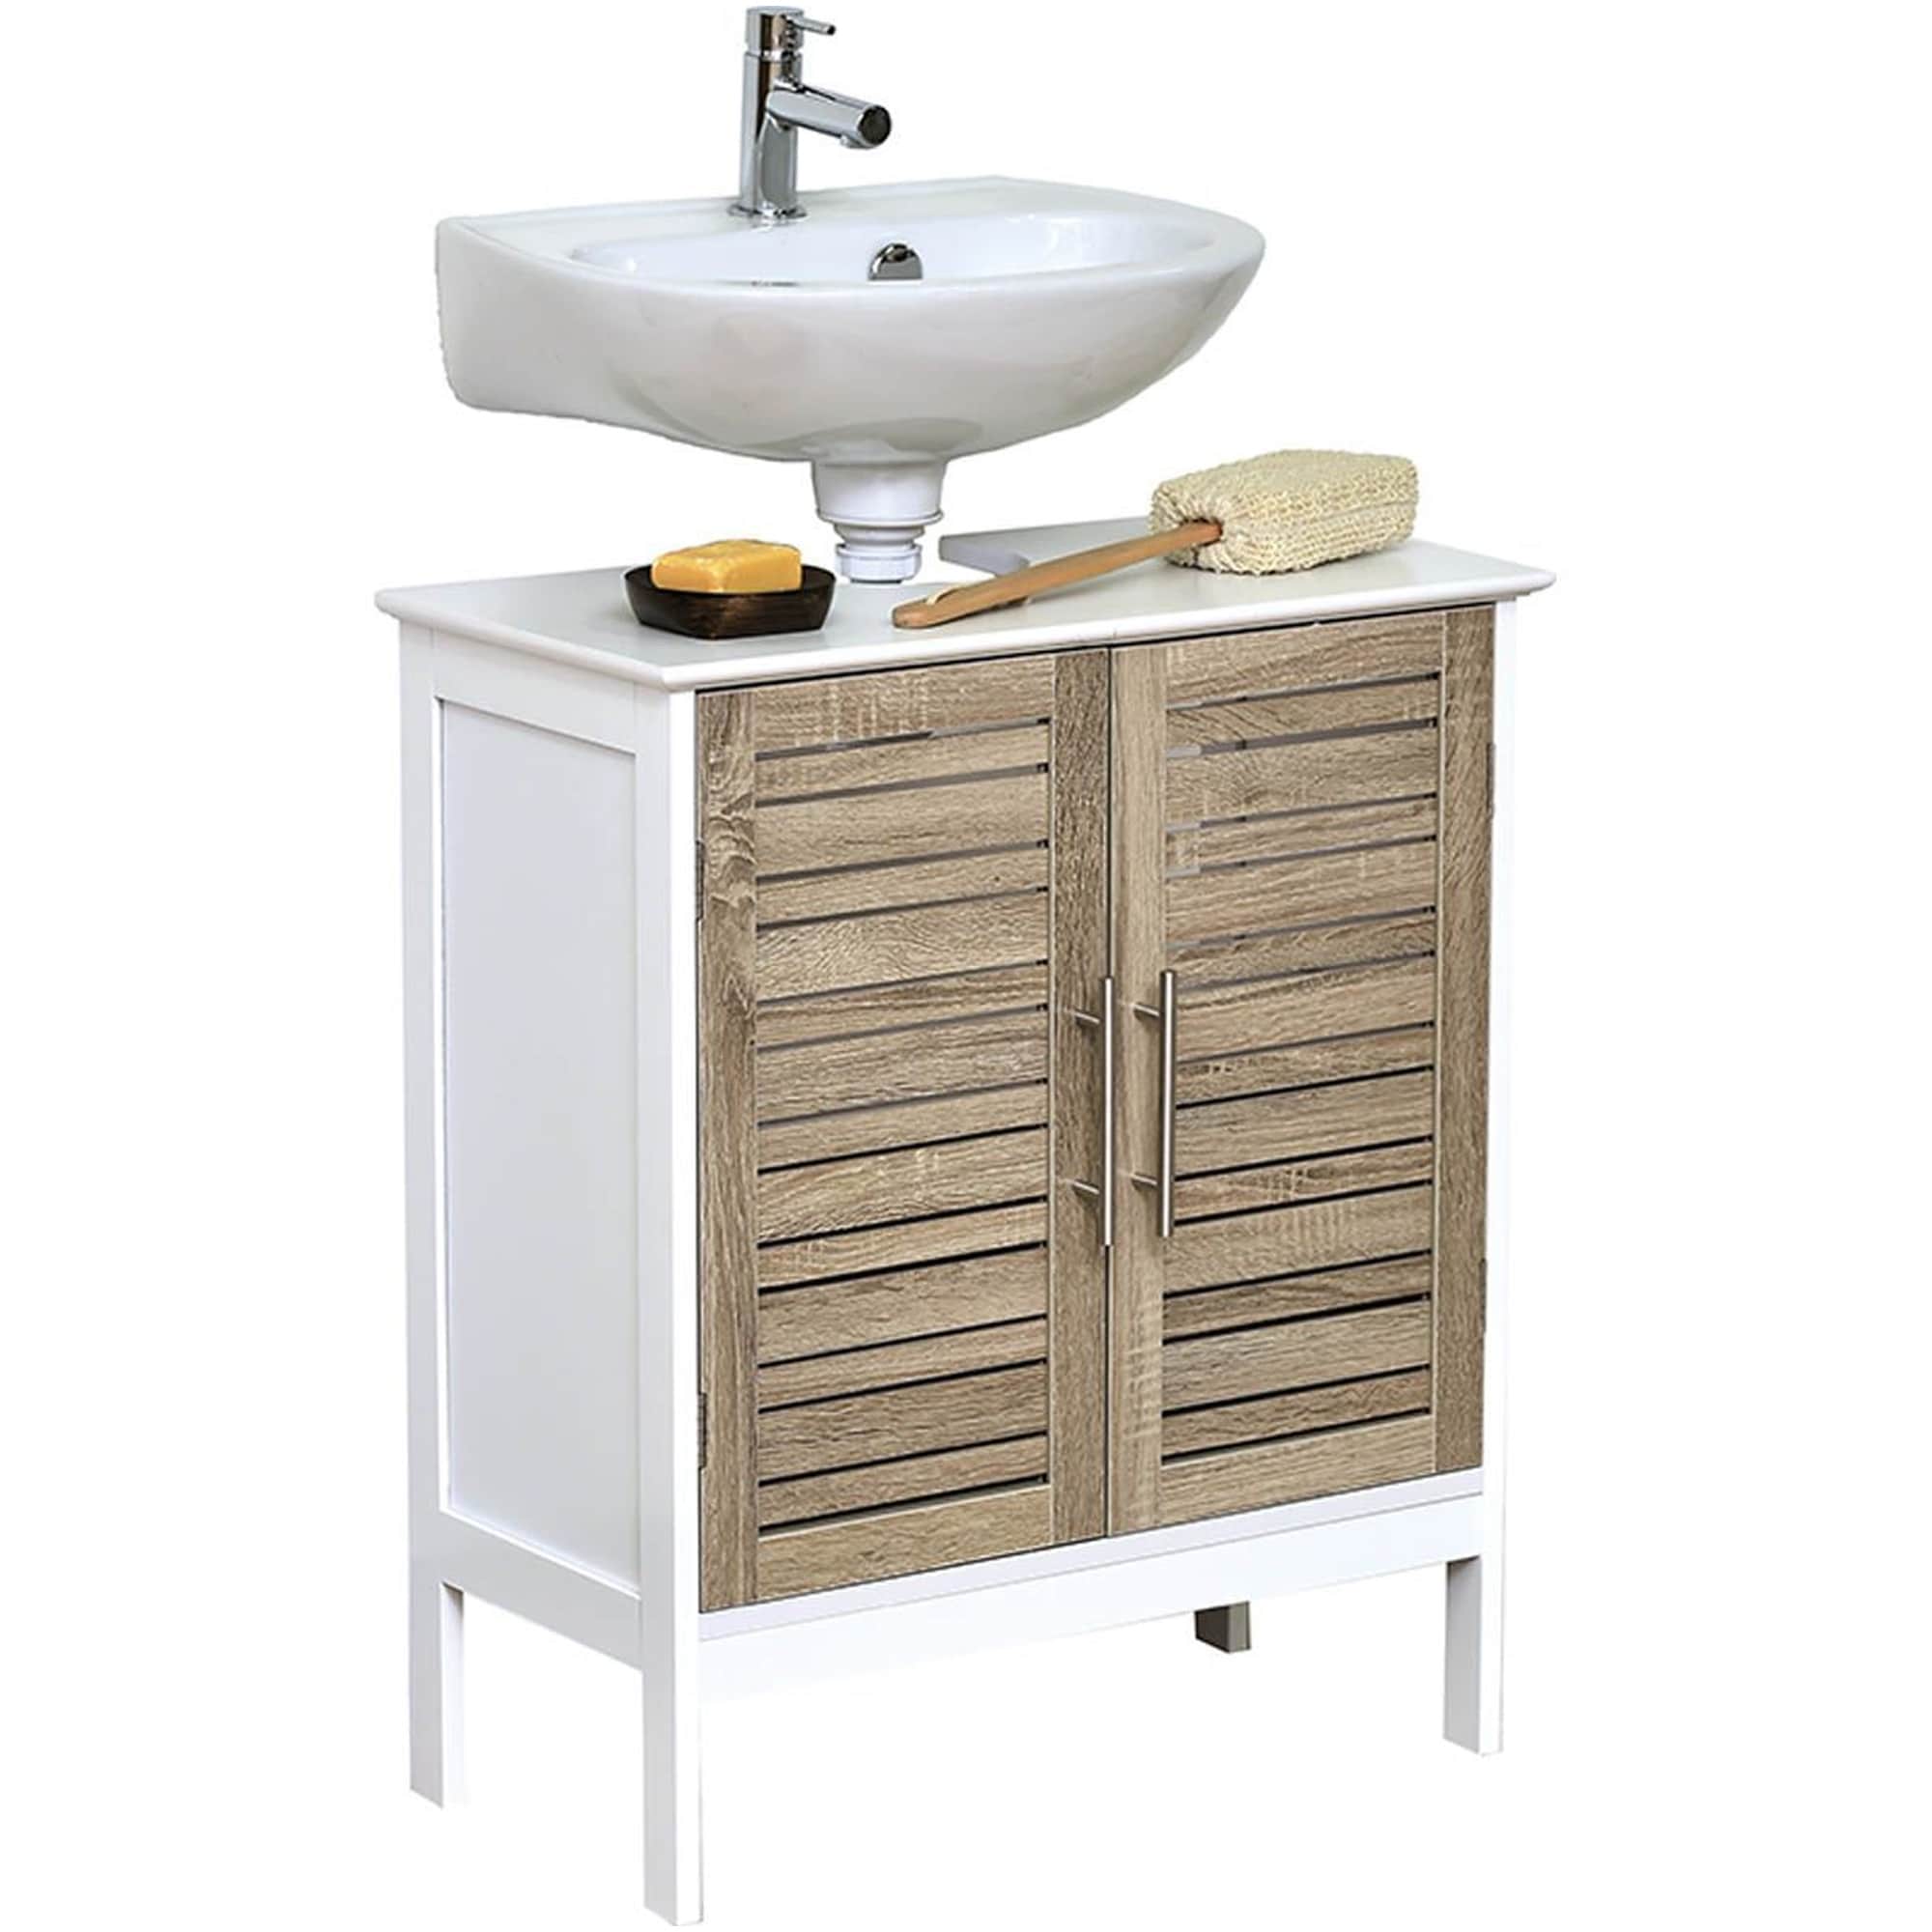 https://ak1.ostkcdn.com/images/products/is/images/direct/8417f279185d9d62d0c26144ab190f4e8e1abfc3/Wall-Mounted-Sink-Floor-Cabinet-Stockholm-2-Doors-Wood.jpg